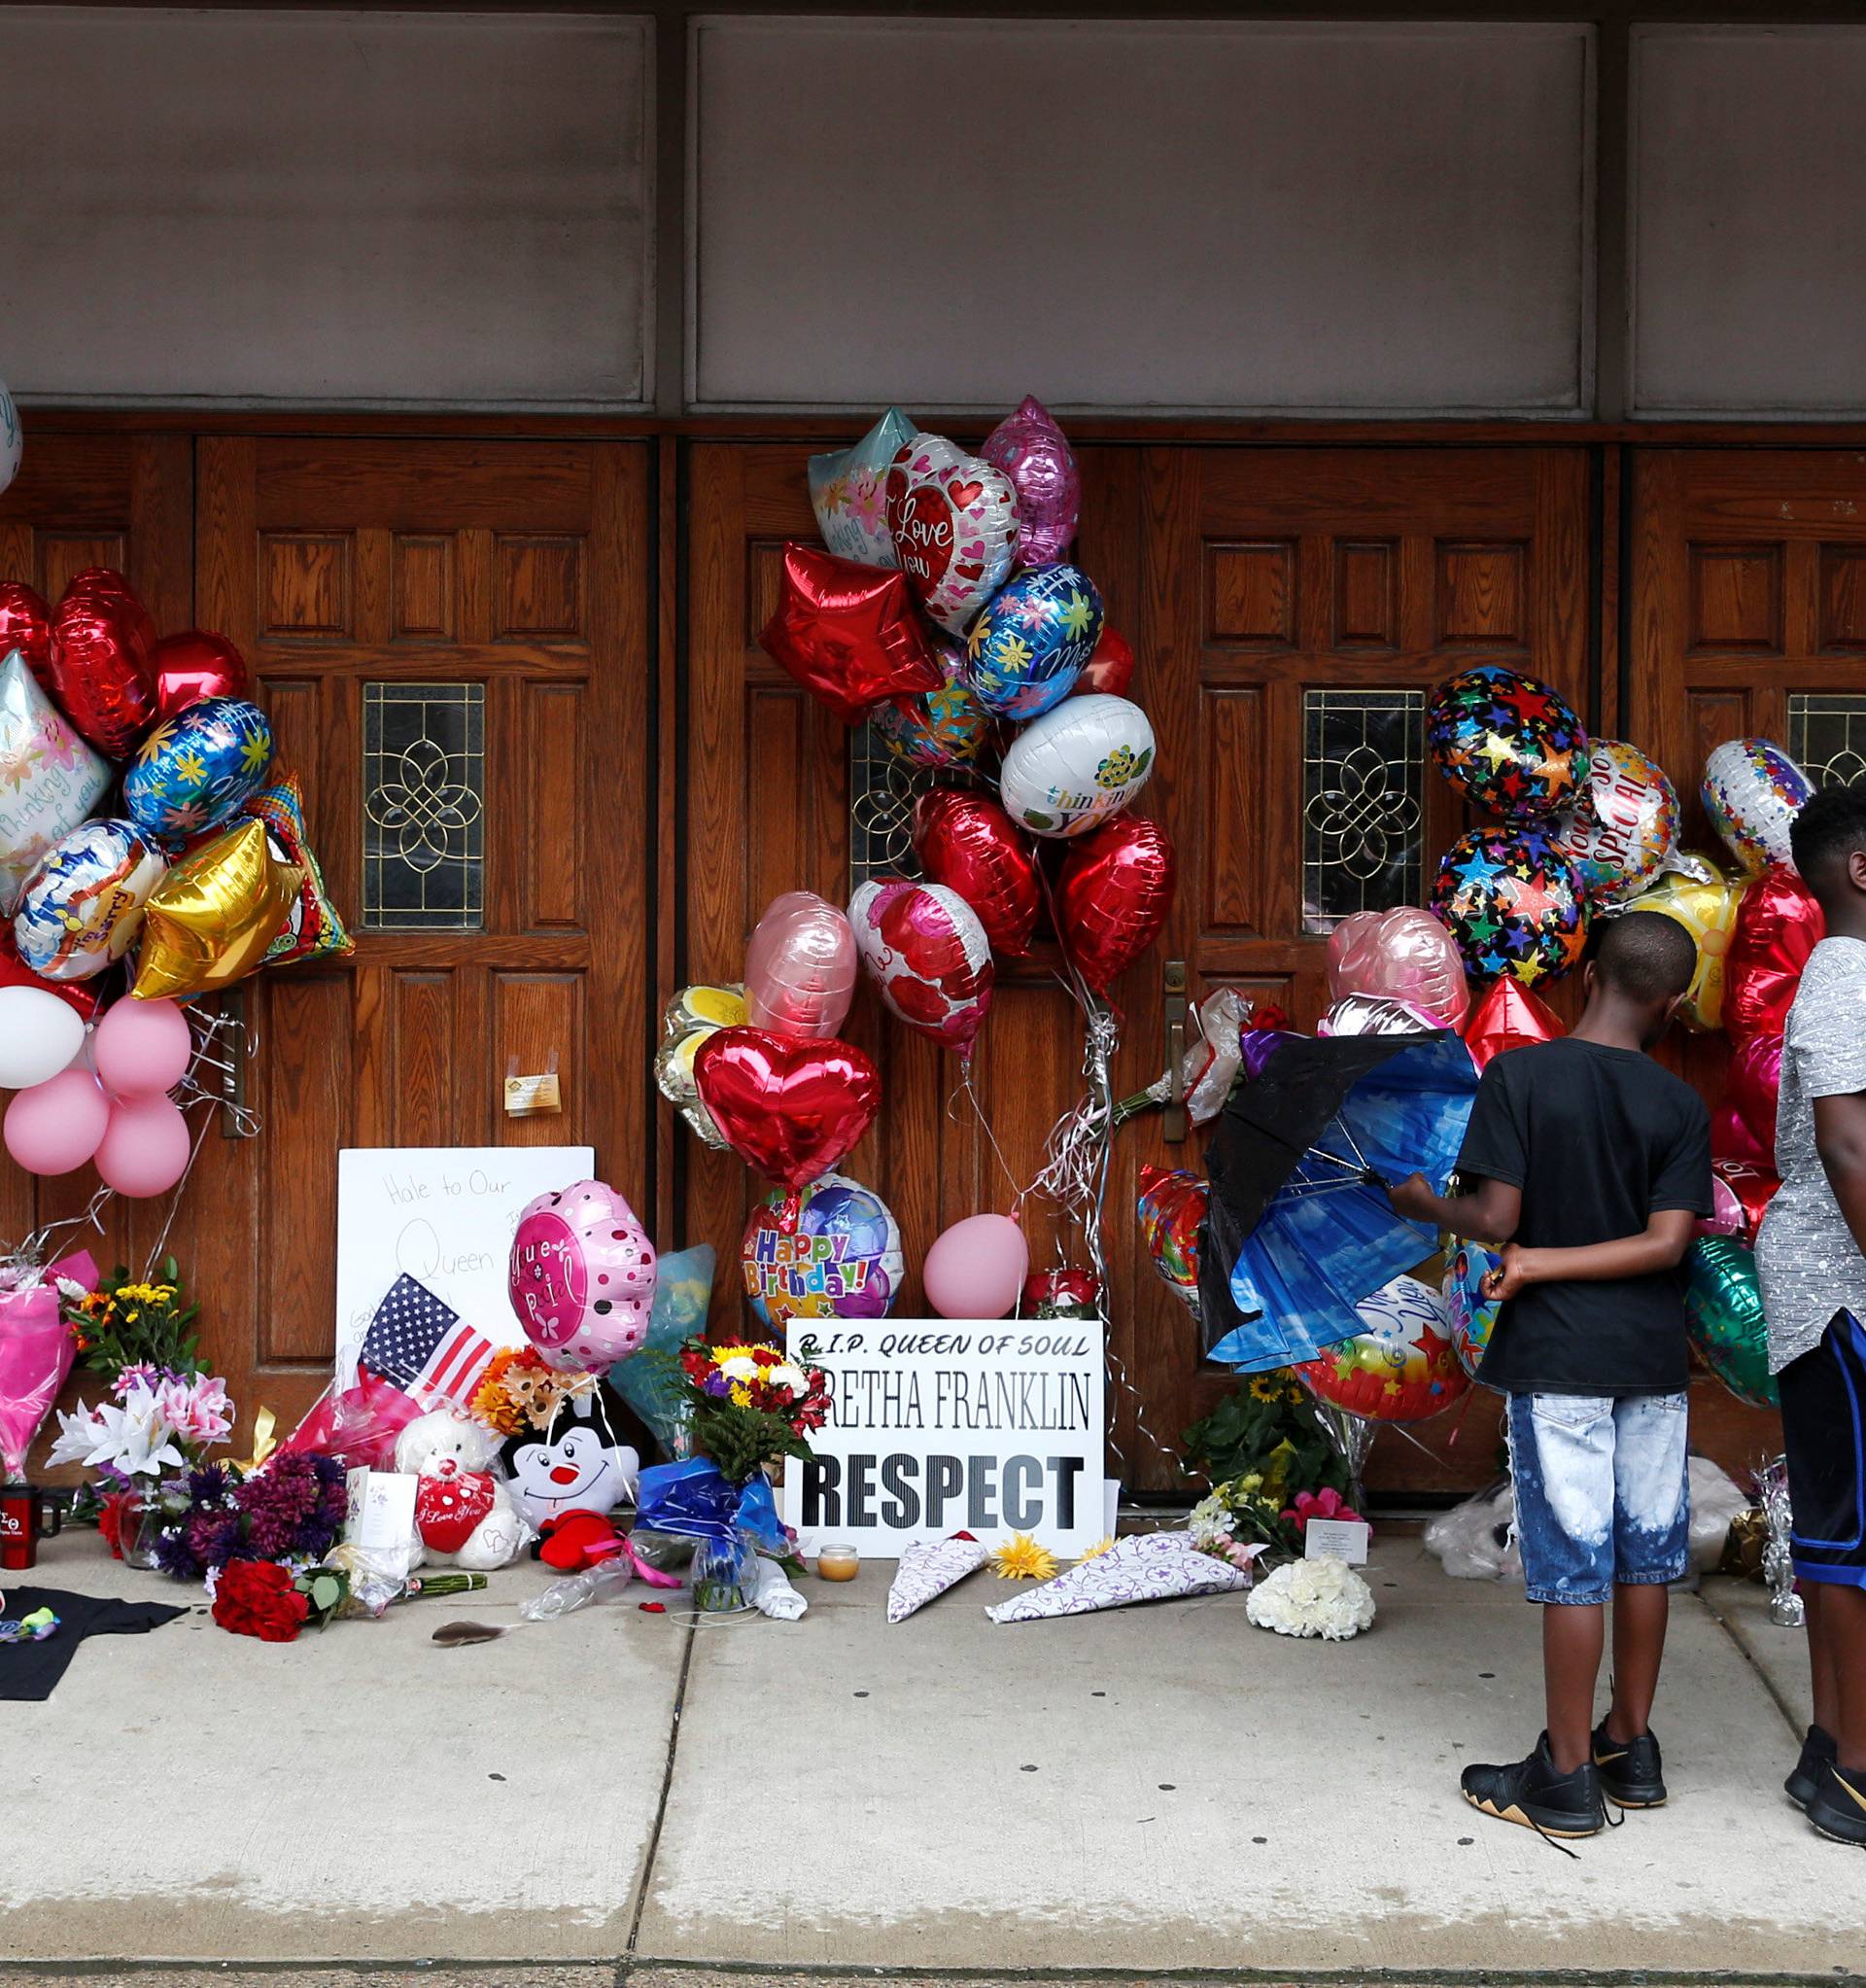 A memorial in memory of singer Aretha Franklin is seen outside New Bethel Baptist Church in Detroit,